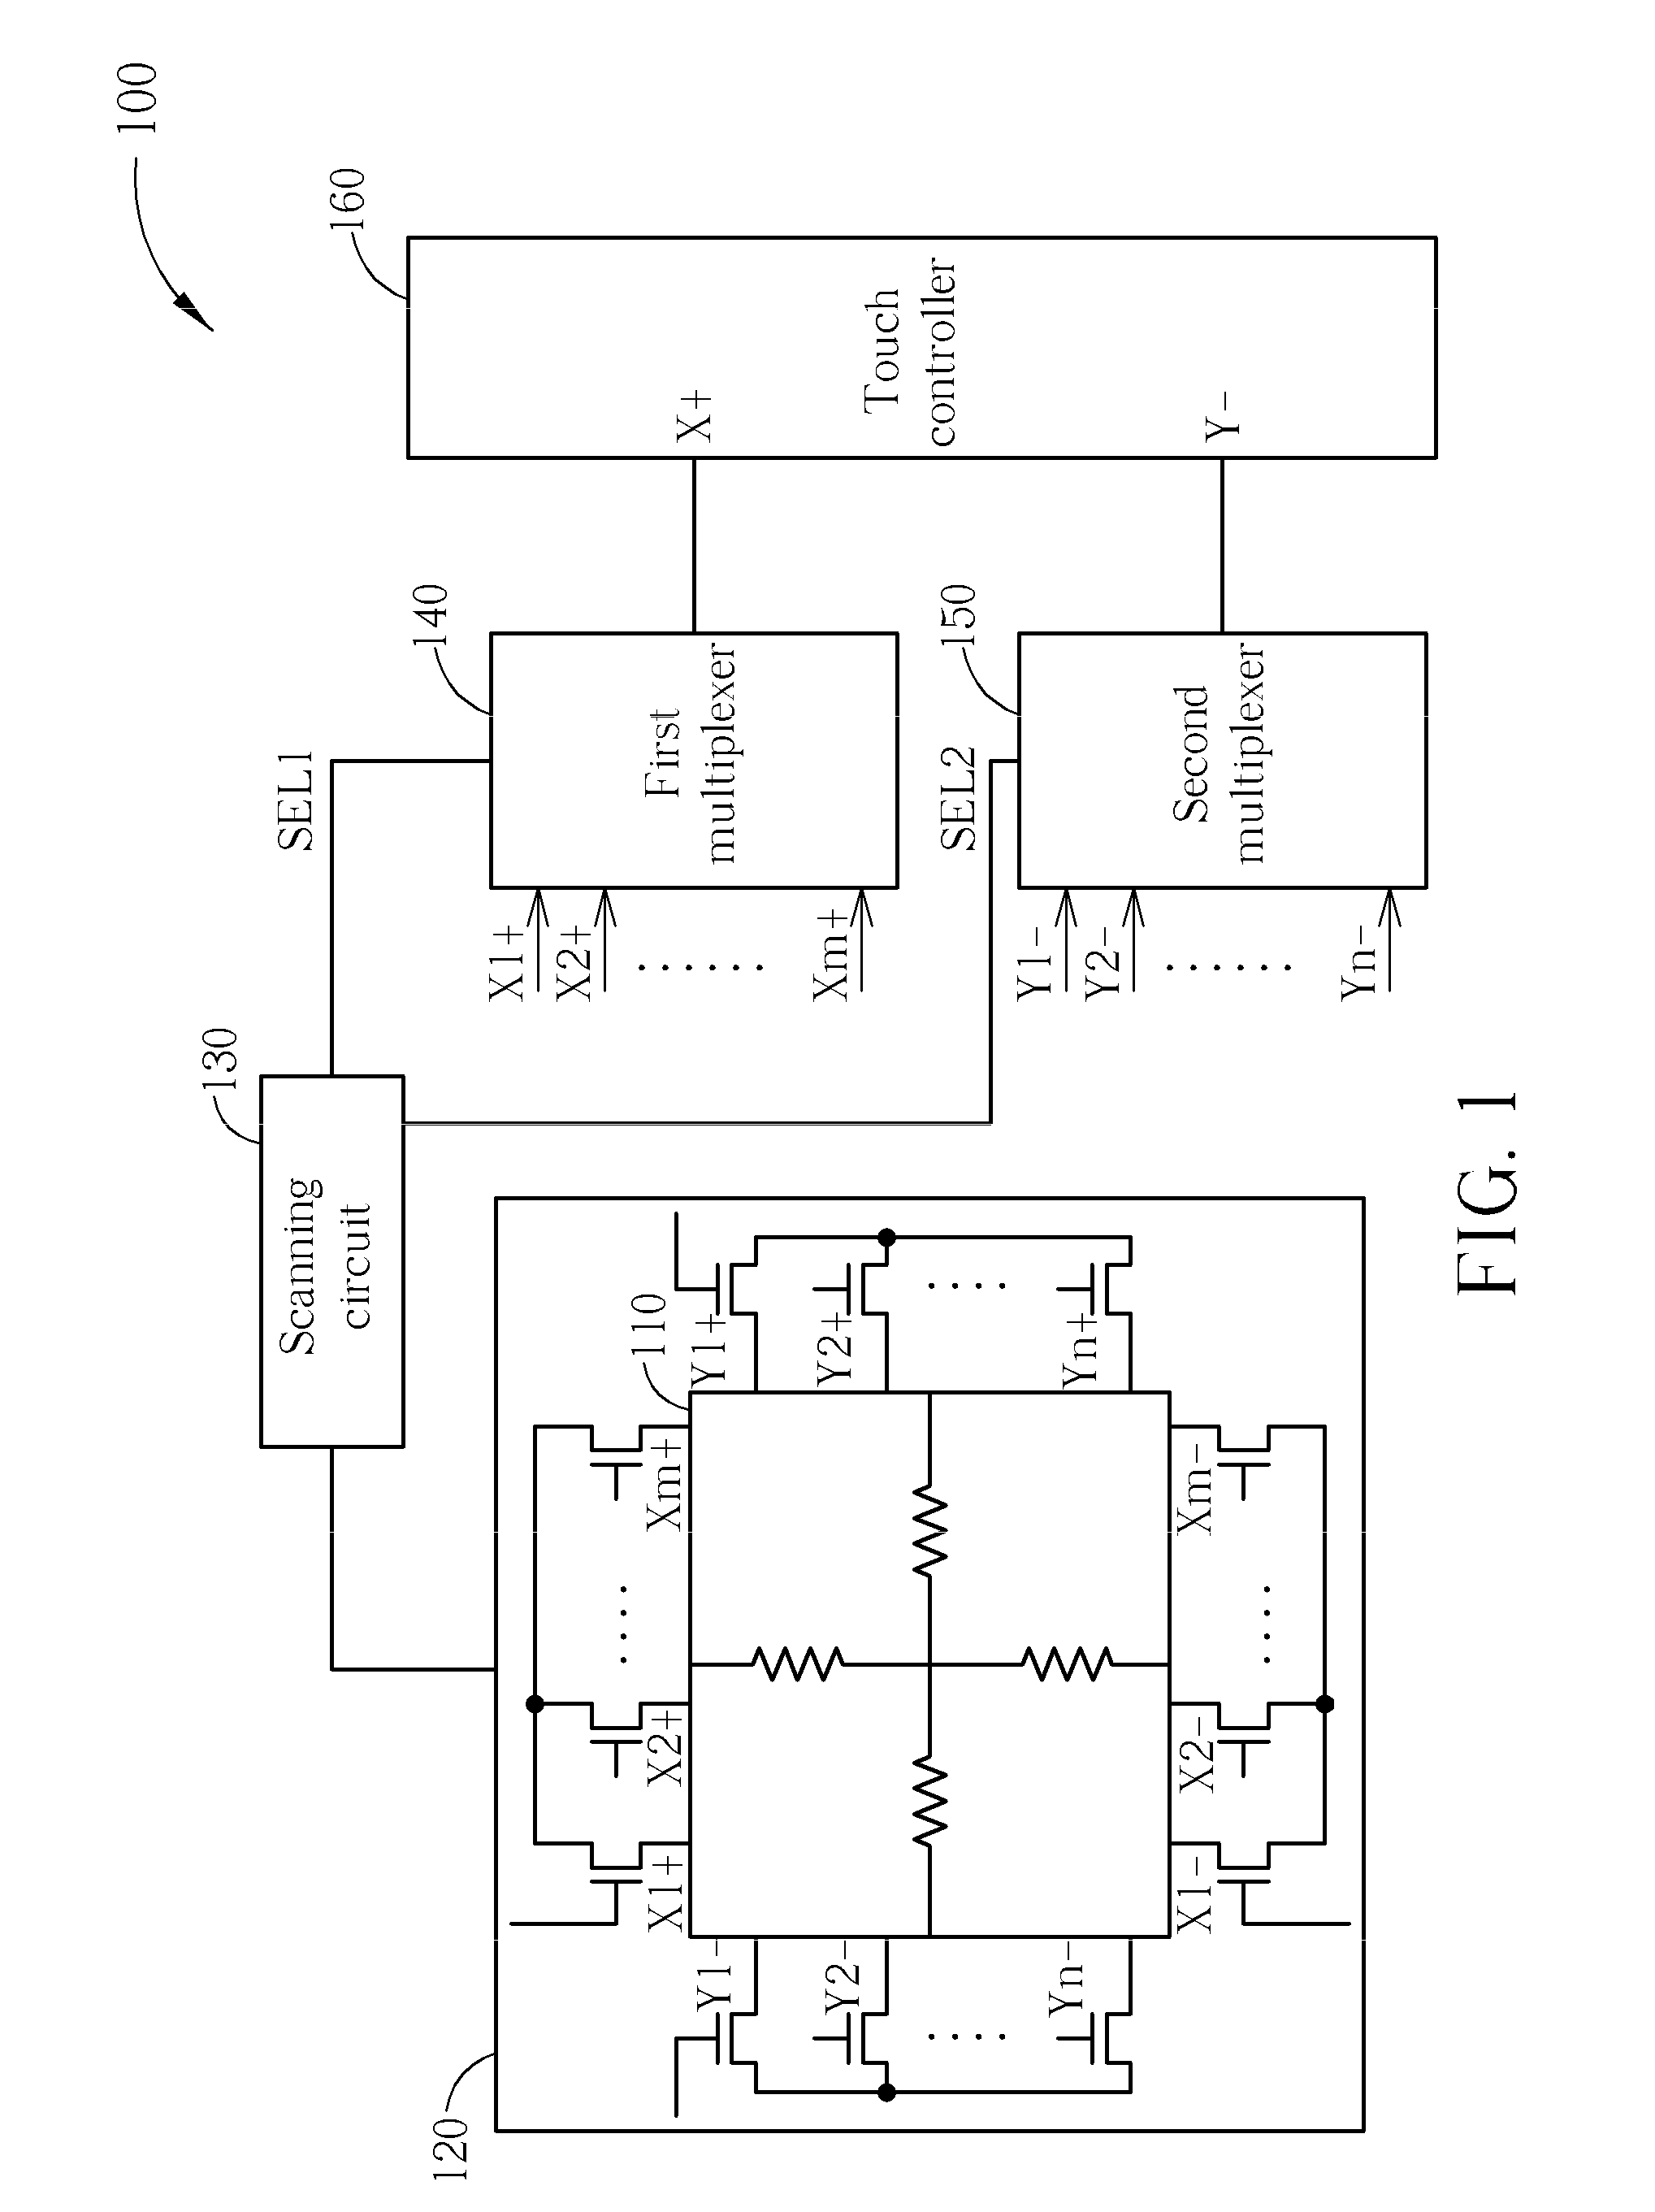 Resistive multi-touch device and method for detecting touched points of the resistive multi-touch device thereof